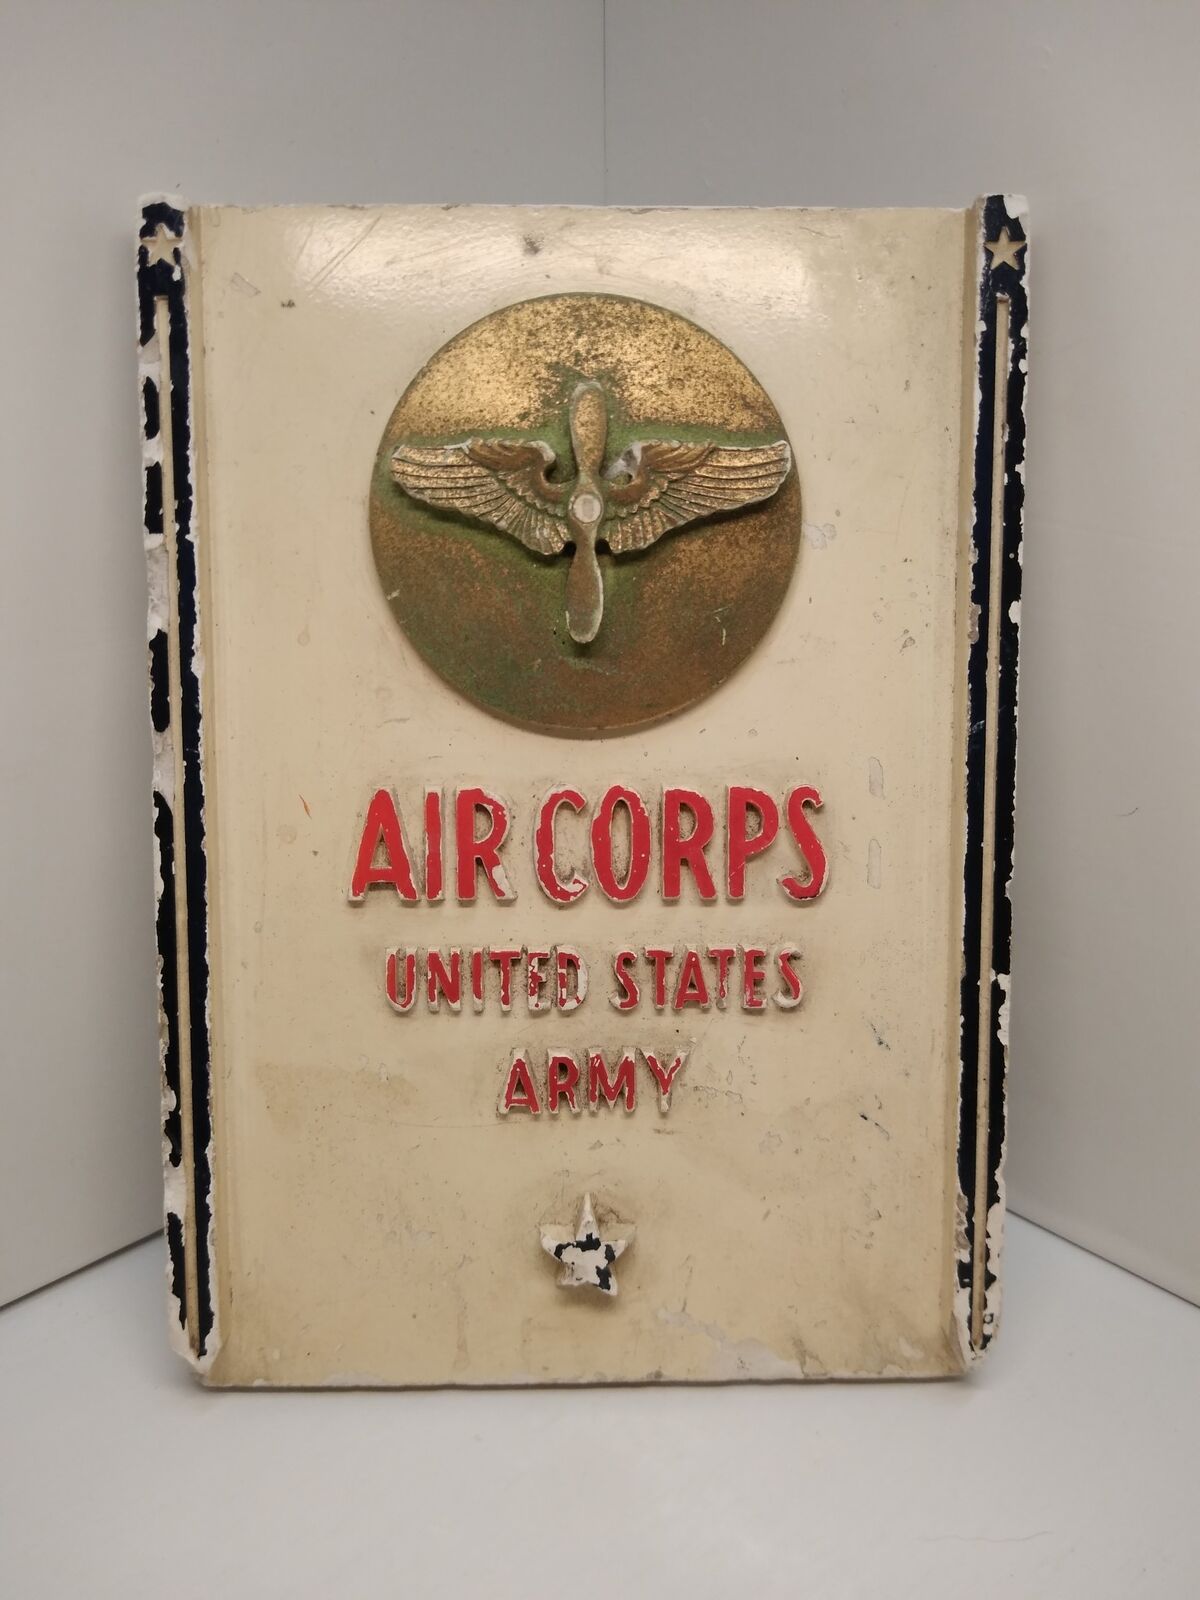 Rare Unique WW 2 AIR CORPS UNITED STATES ARMY Plaster Wall Hanging Plaque Sign